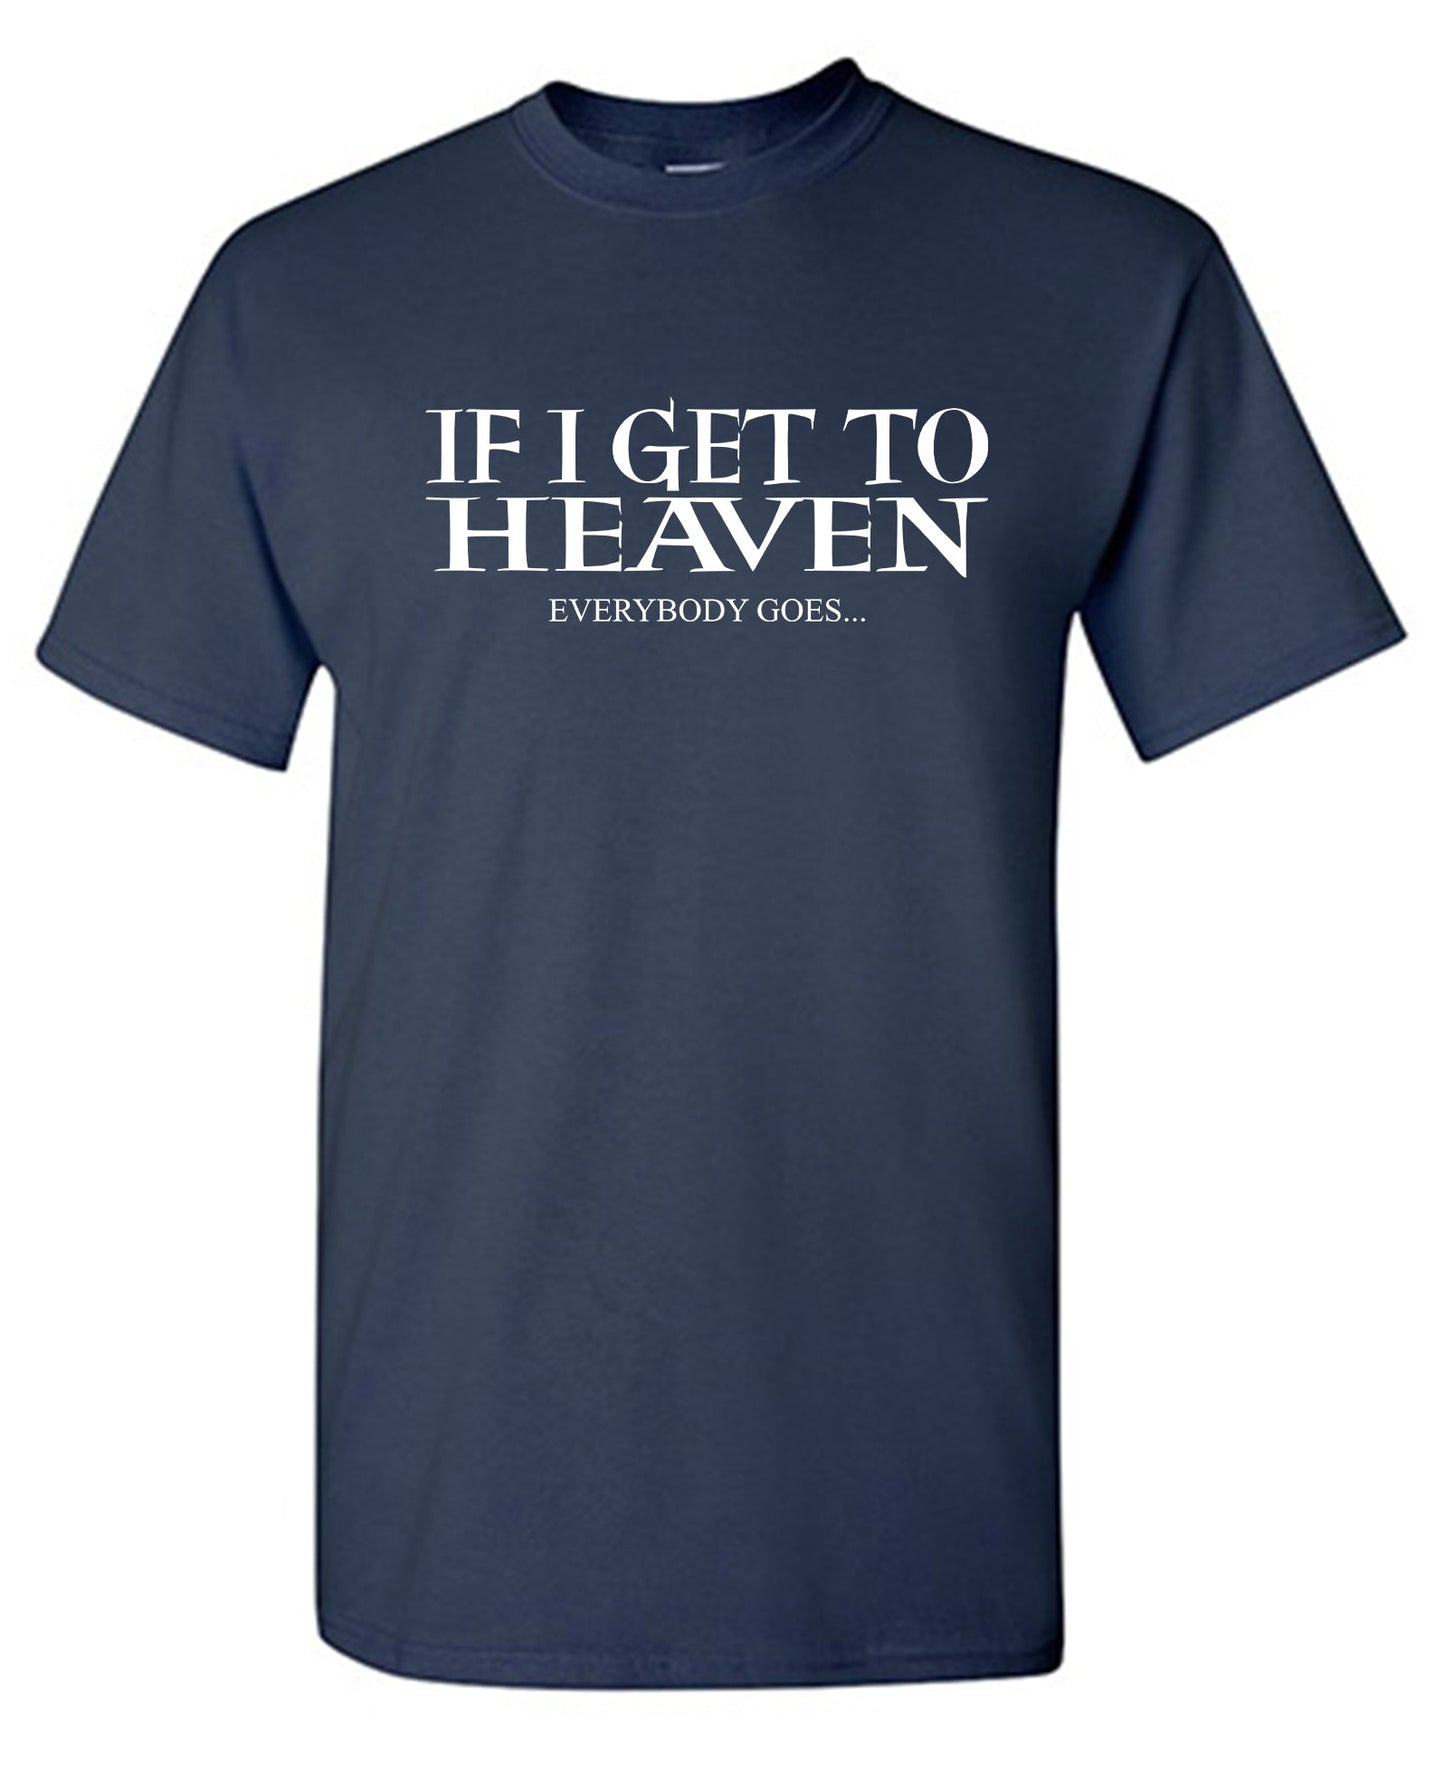 If I Get to Heaven, Everybody goes - Funny T Shirts & Graphic Tees